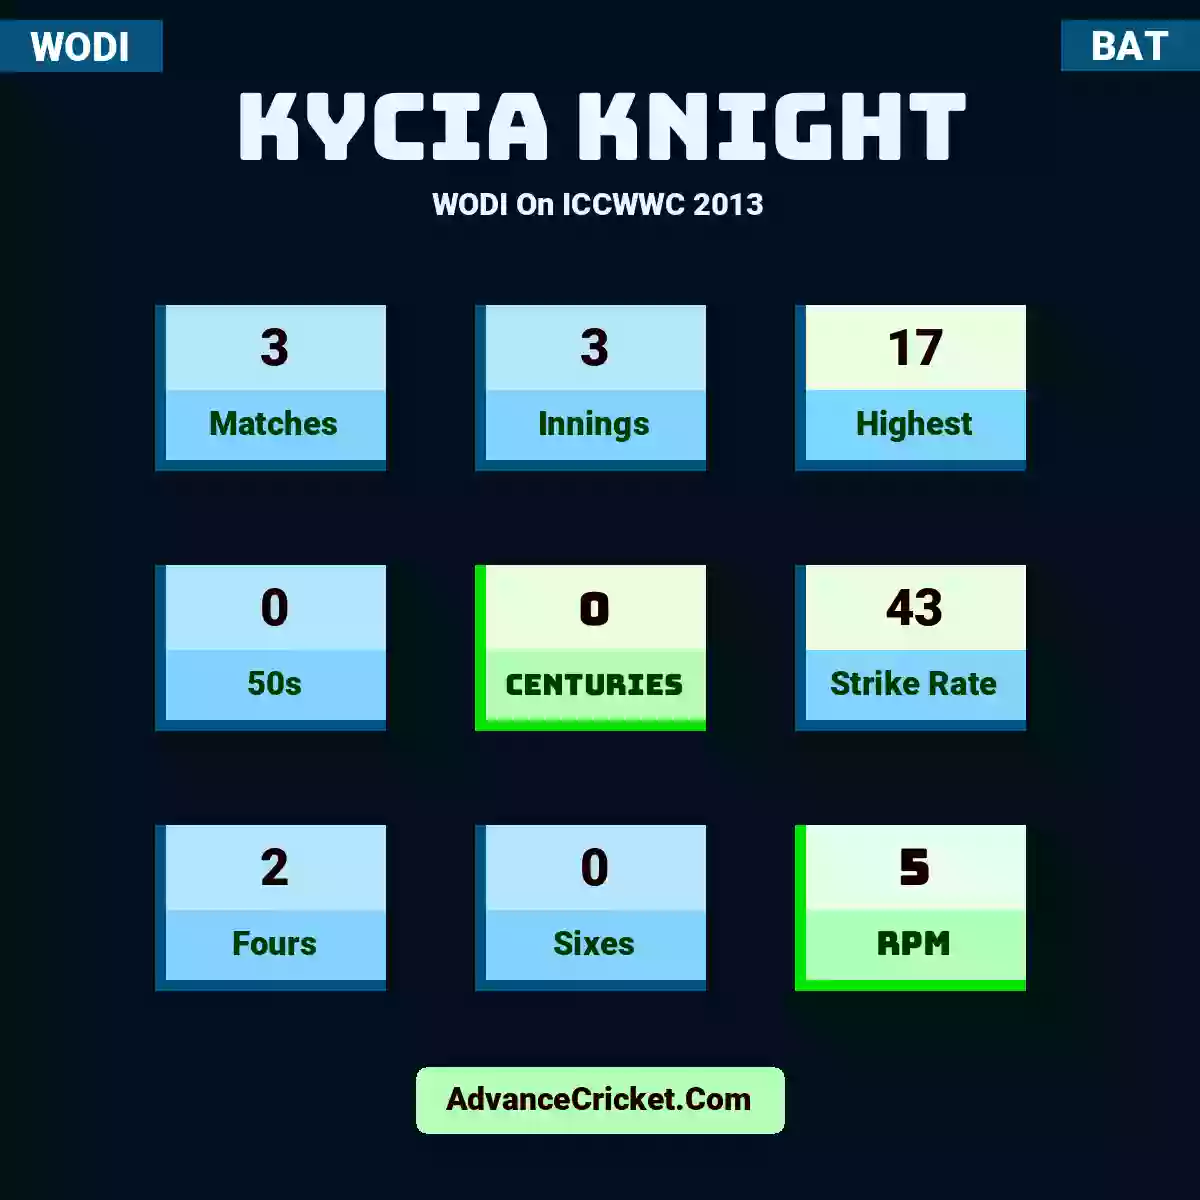 Kycia Knight WODI  On ICCWWC 2013, Kycia Knight played 3 matches, scored 17 runs as highest, 0 half-centuries, and 0 centuries, with a strike rate of 43. K.Knight hit 2 fours and 0 sixes, with an RPM of 5.